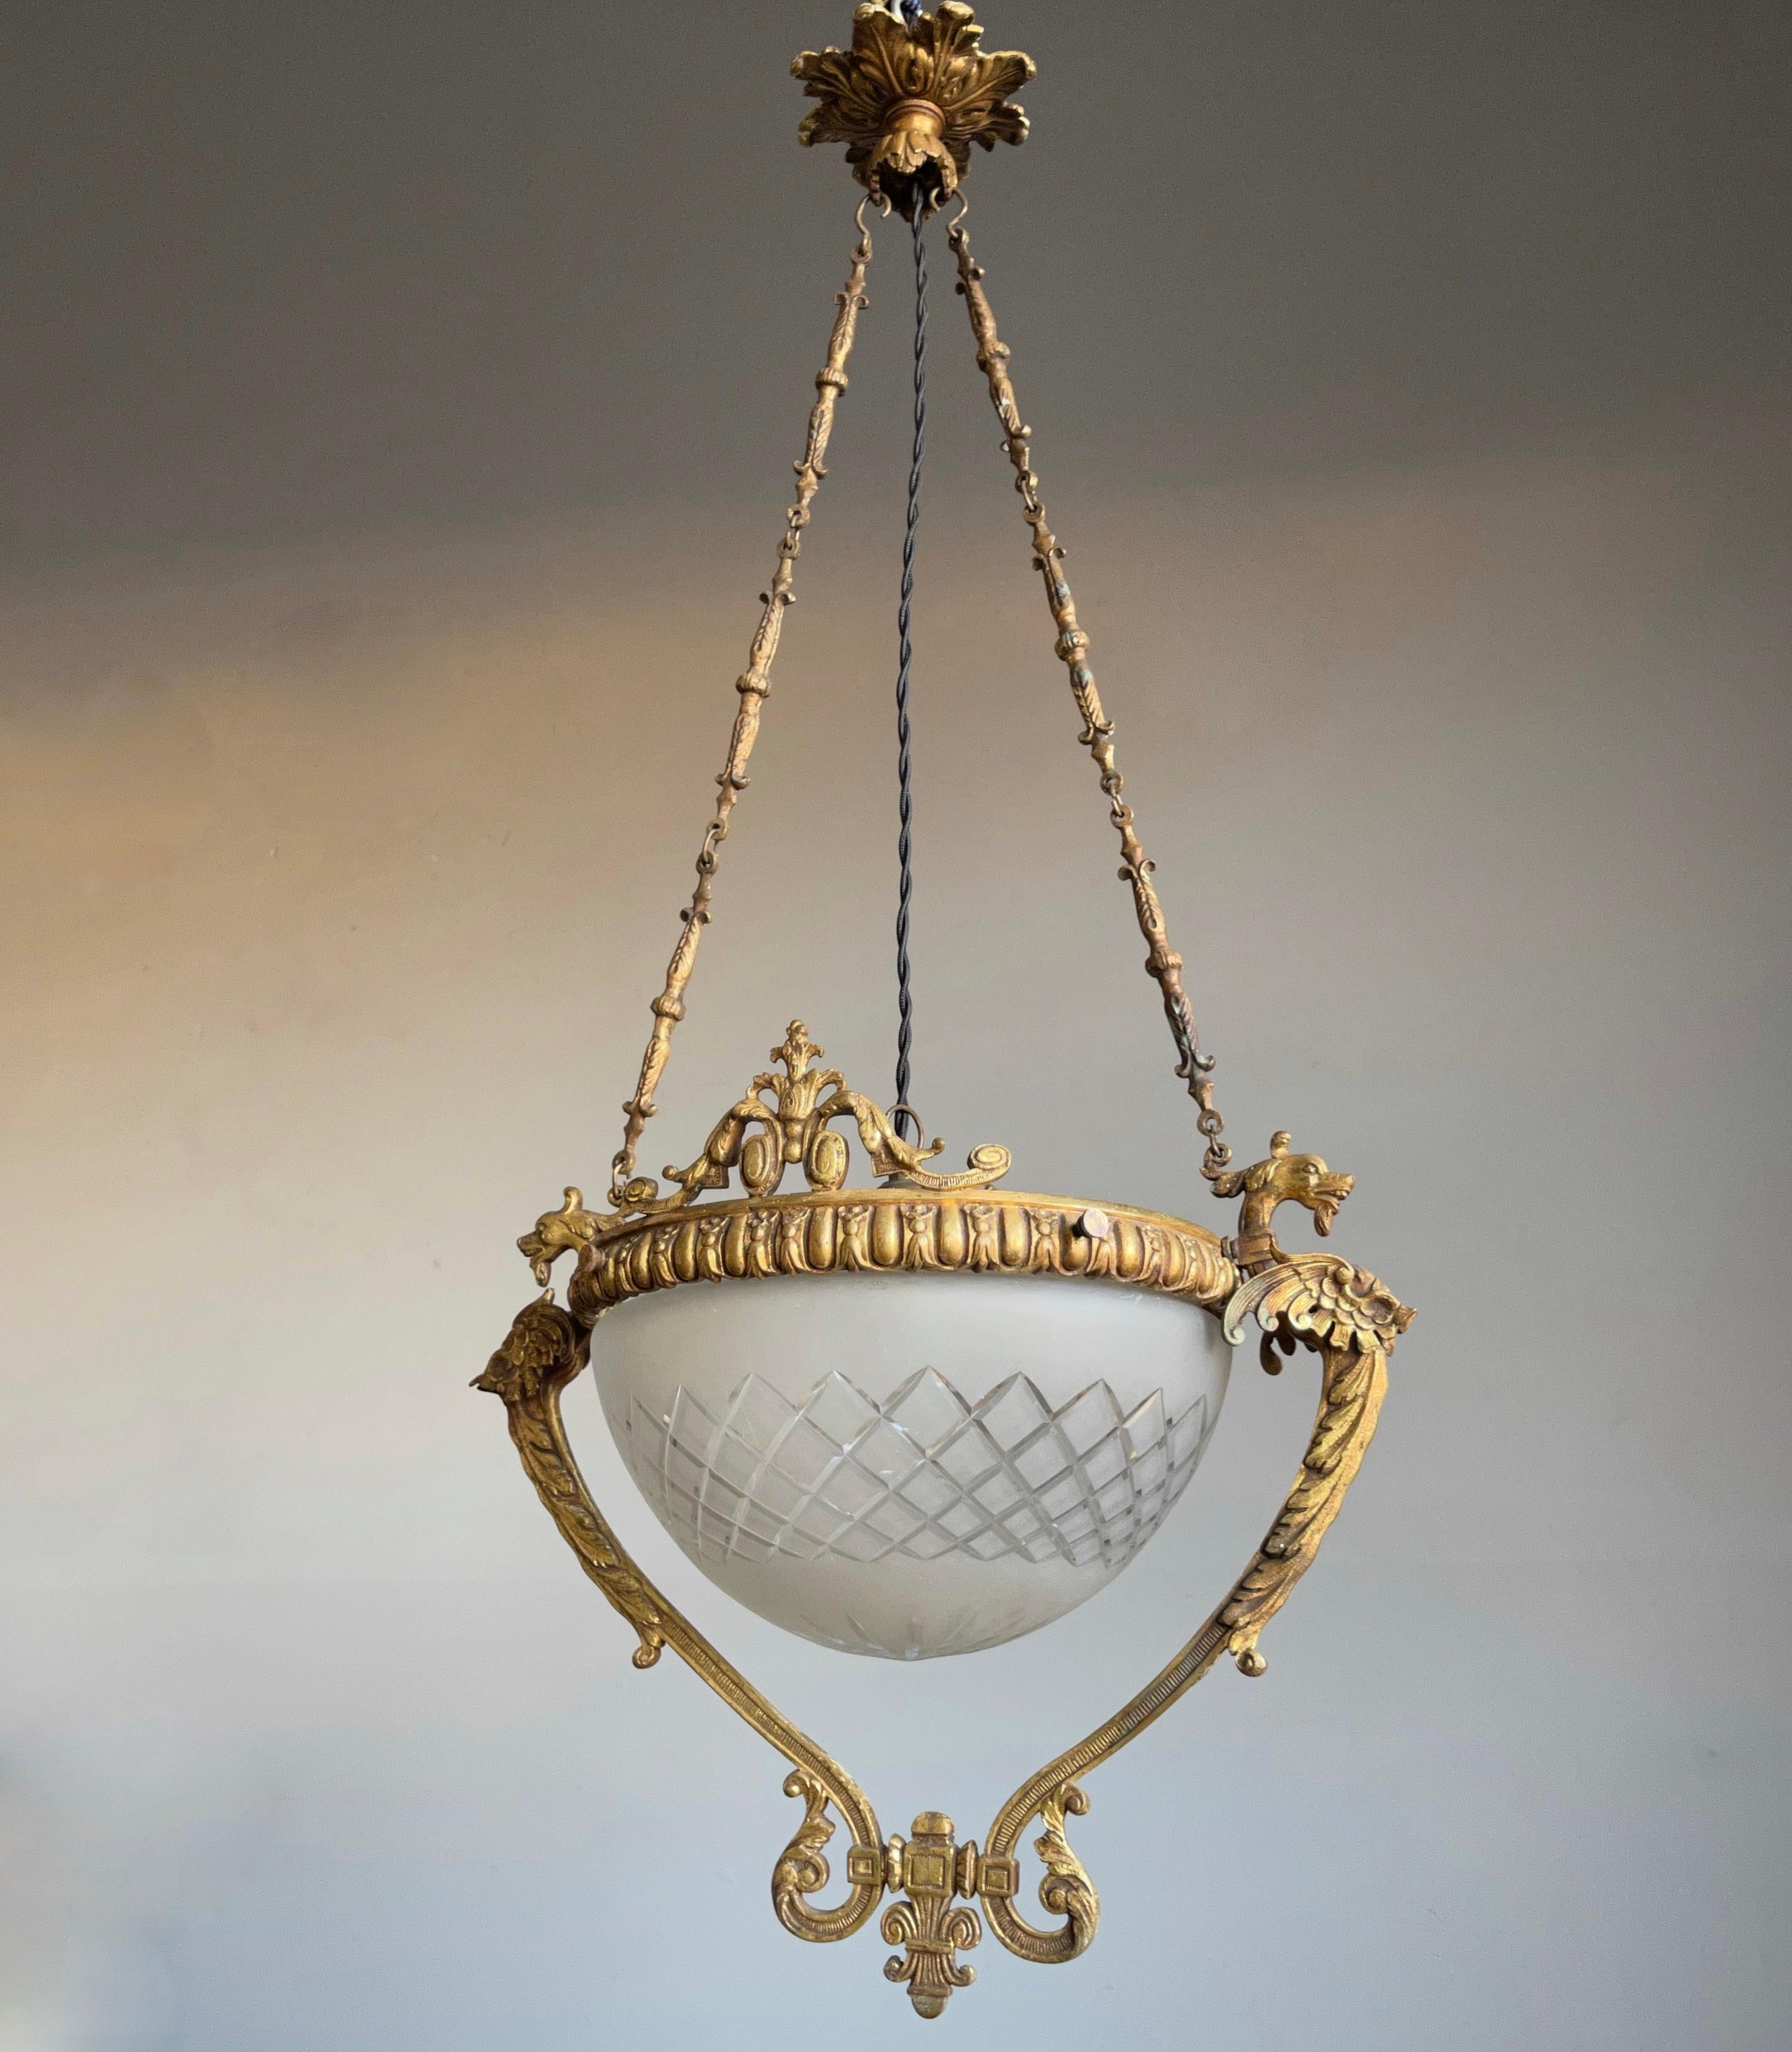 Stylish and great workmanship antique French pendant light.

If you are looking for an elegant, beautiful and meaningful chandelier to grace your living space then this fine specimen from the earliest years of the 1900s could be yours to own and